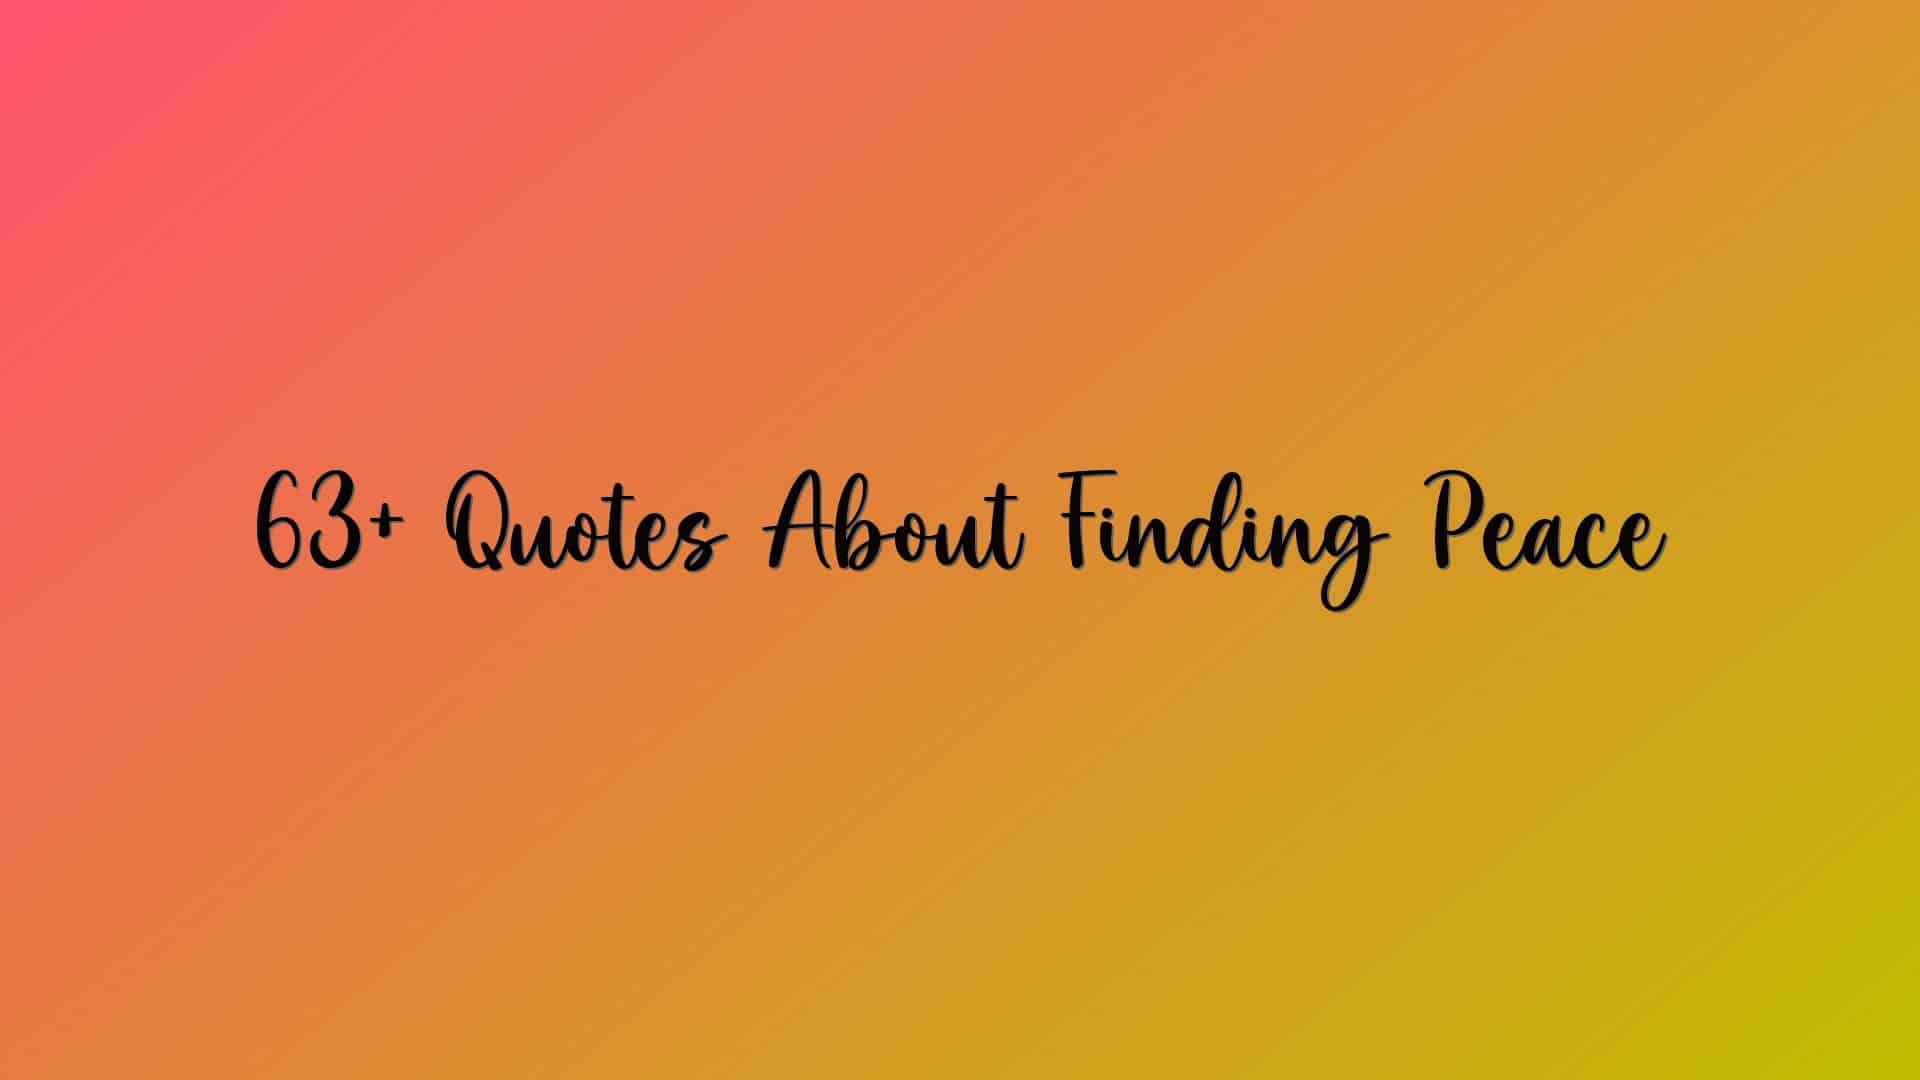 63+ Quotes About Finding Peace